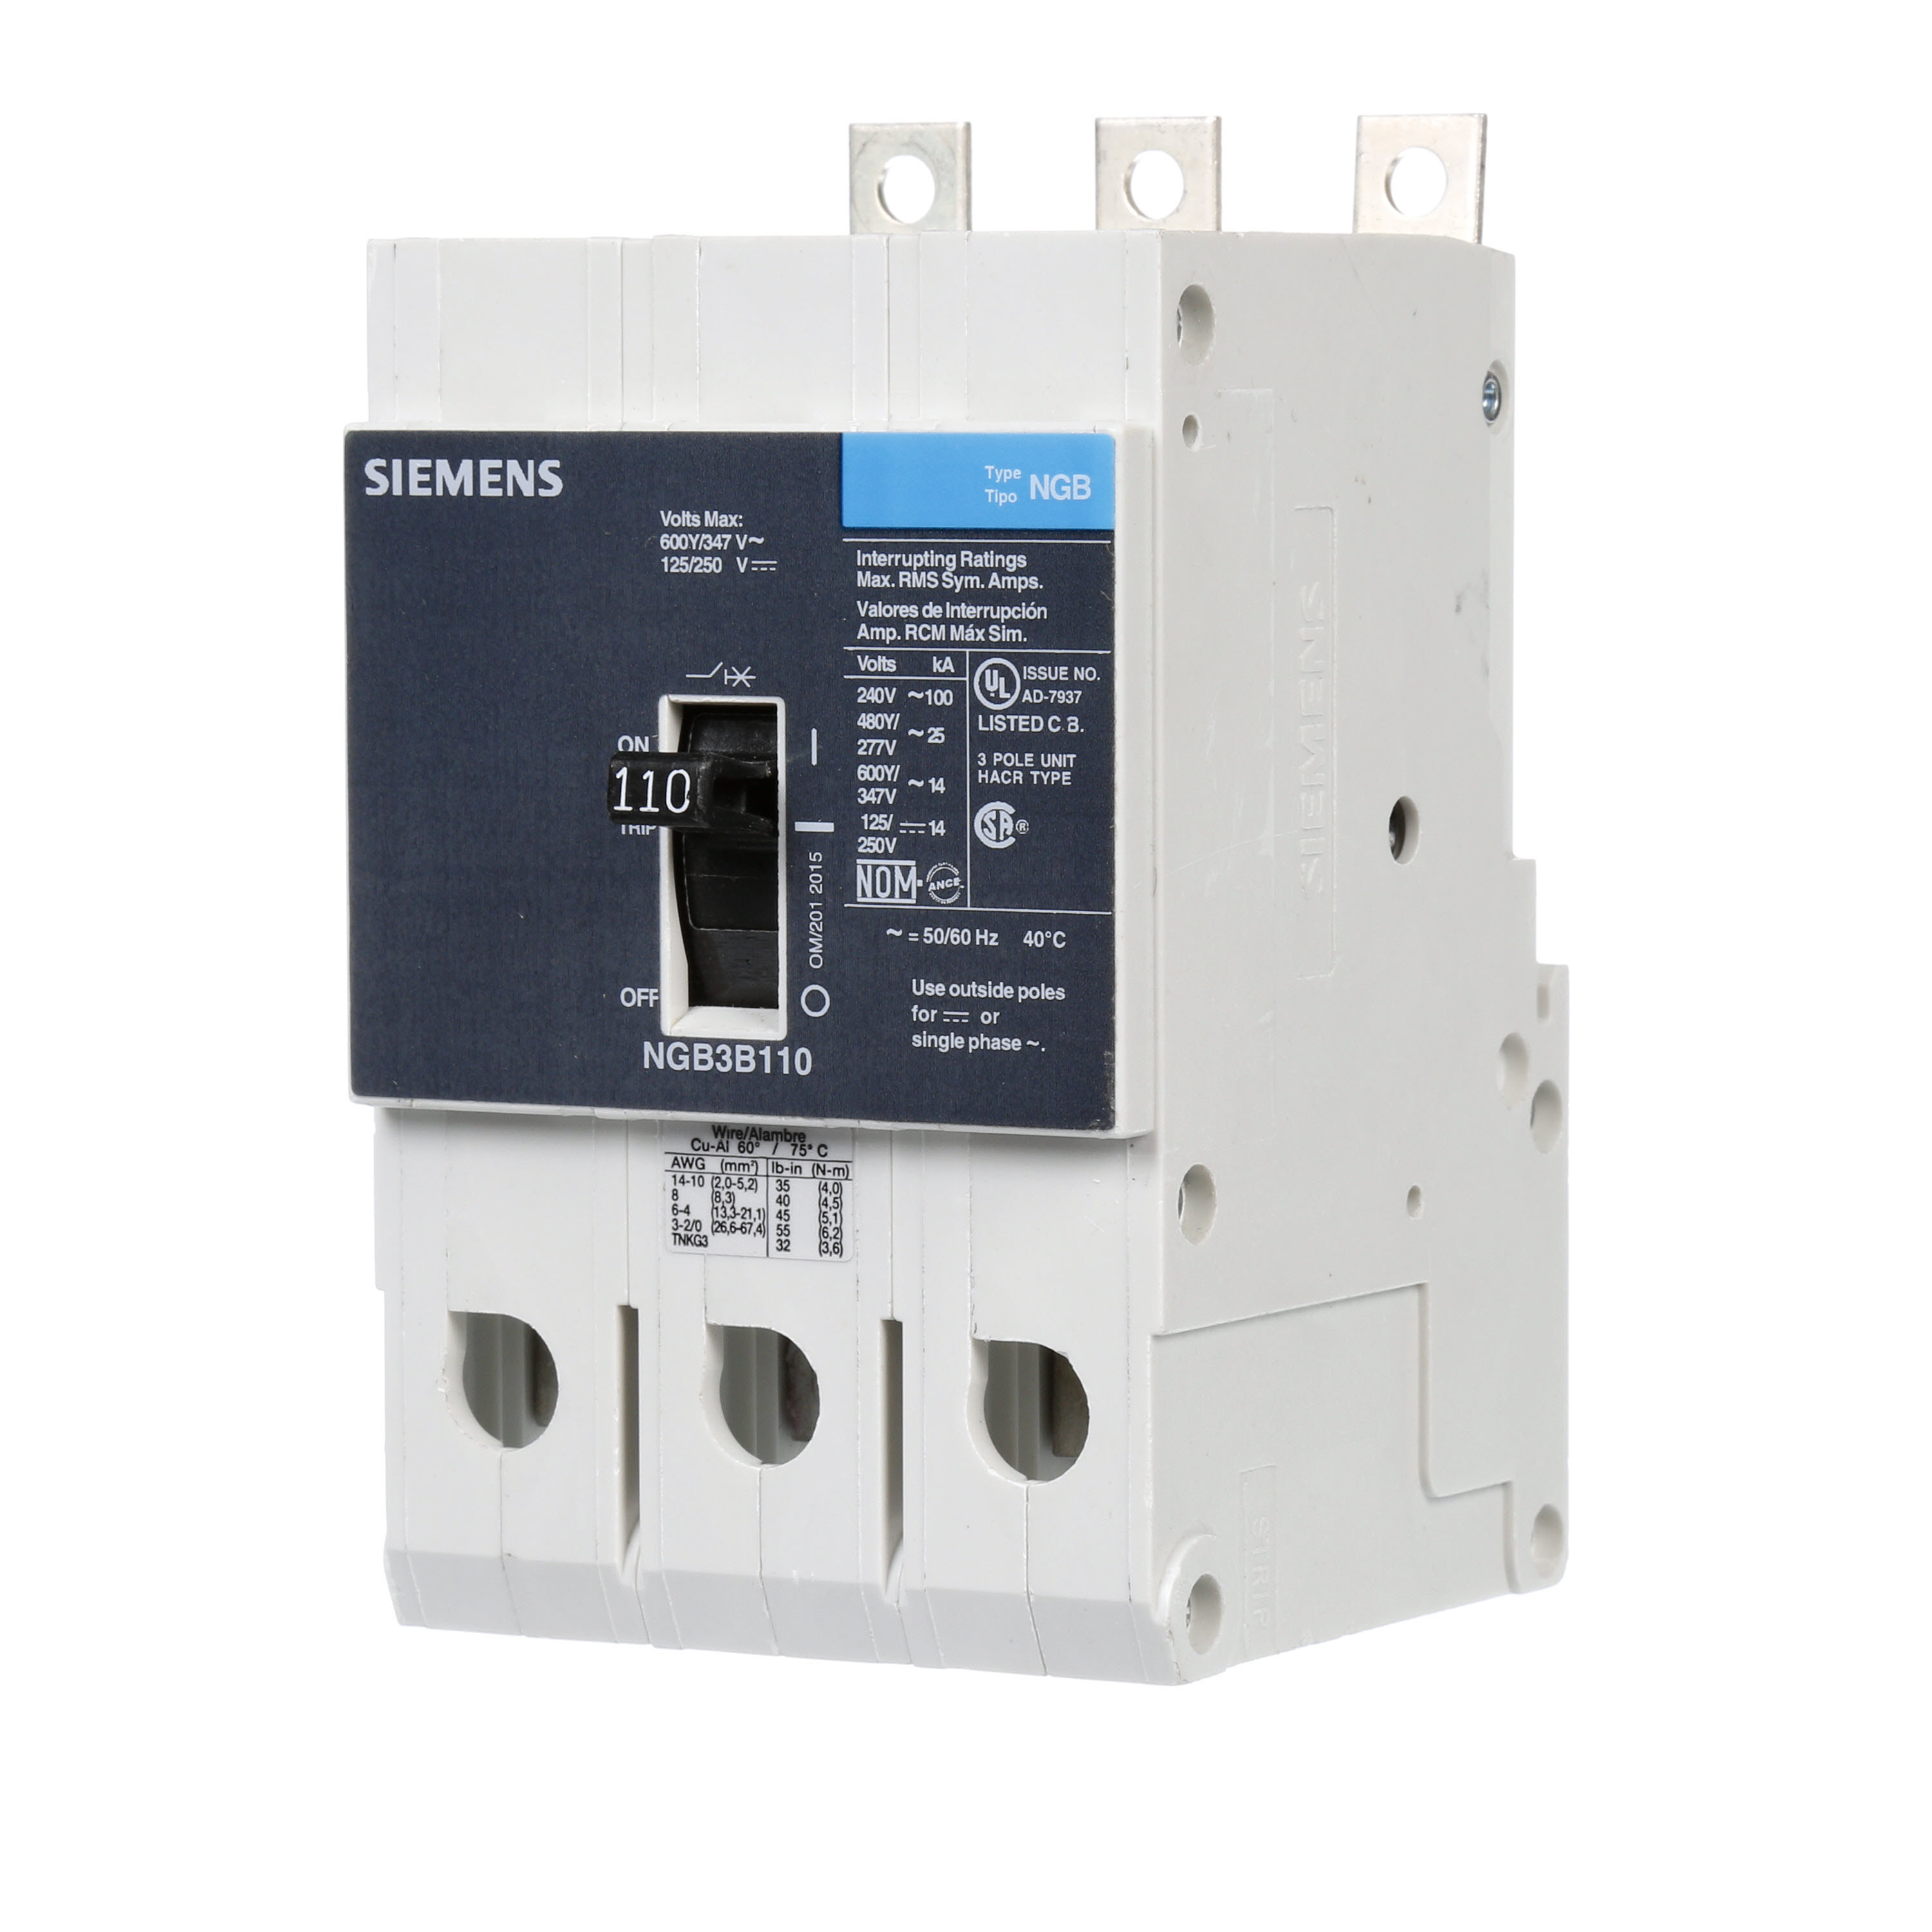 SIEMENS LOW VOLTAGE PANELBOARD MOUNT G FRAME CIRCUIT BREAKER WITH THERMAL - MAGNETIC TRIP. UL LISTED NGB FRAME WITH STANDARD BREAKING CAPACITY. 110A 3-POLE (14KAIC AT 600Y/347V) (25KAIC AT 480Y/277V). SPECIAL FEATURES MOUNTS ON PANELBOARD,NO LUGS, VALUE PACK. DIMENSIONS (W x H x D) IN 3 x 5.4 x 2.8.